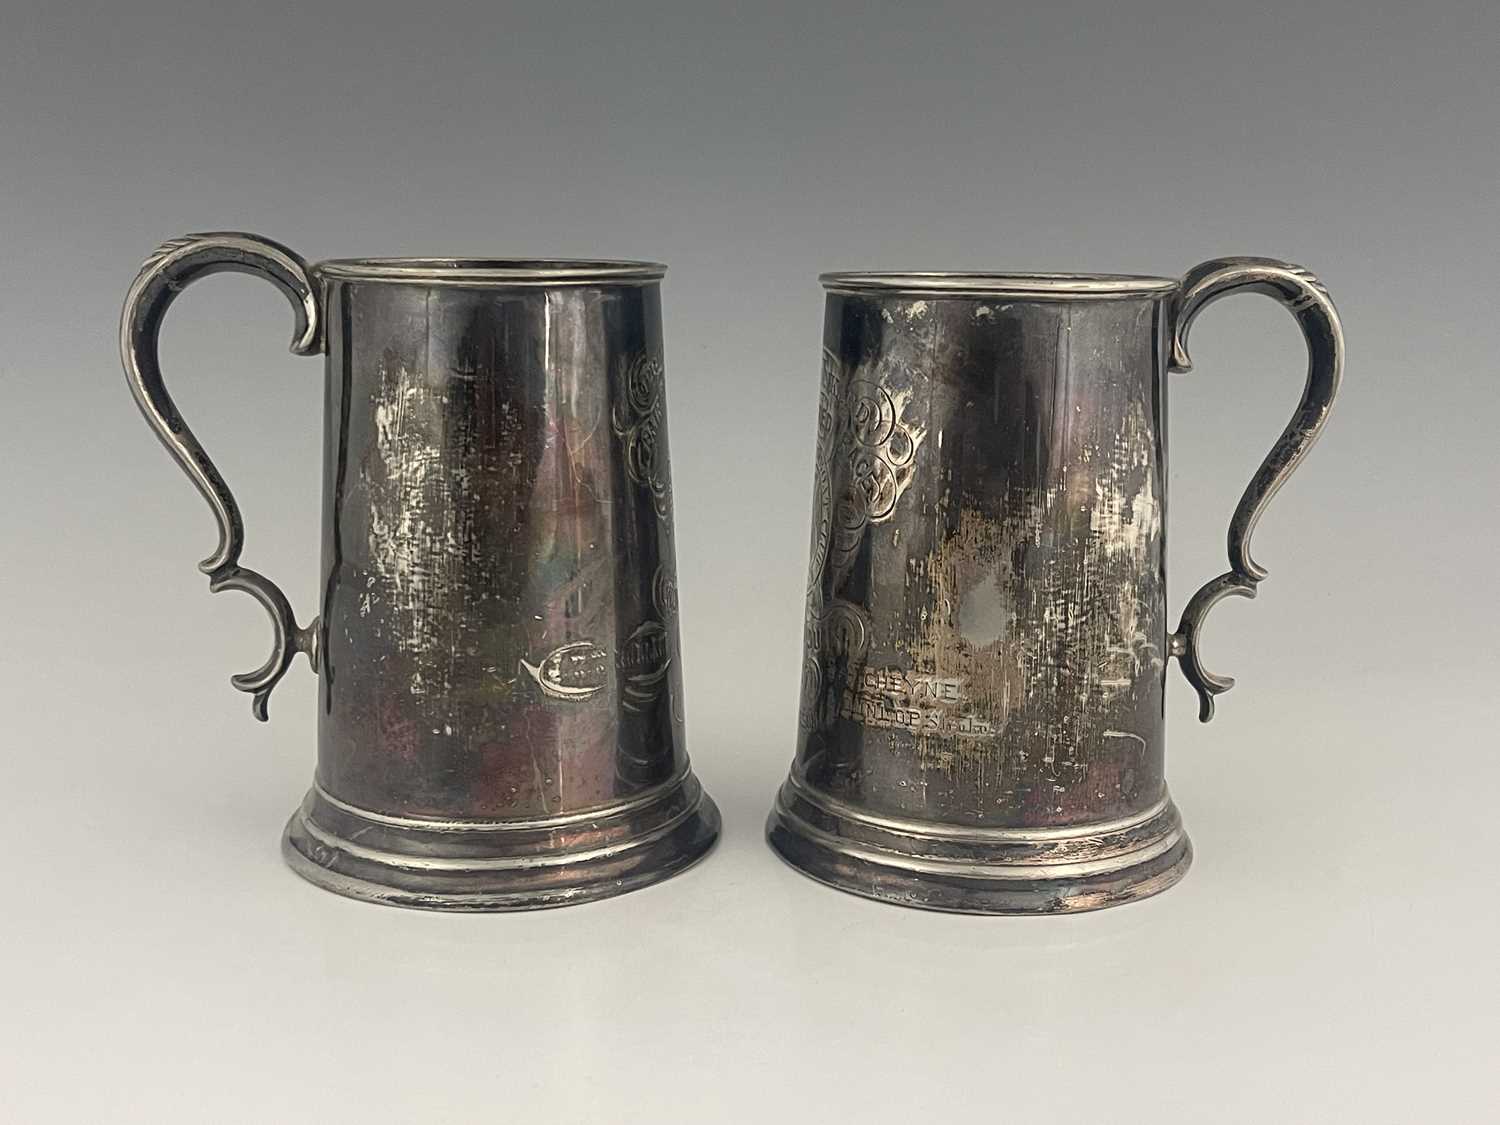 Two Victorian plated rowing prize tankards for the pair oared race, Saint Andrew Boat Club, won 10th